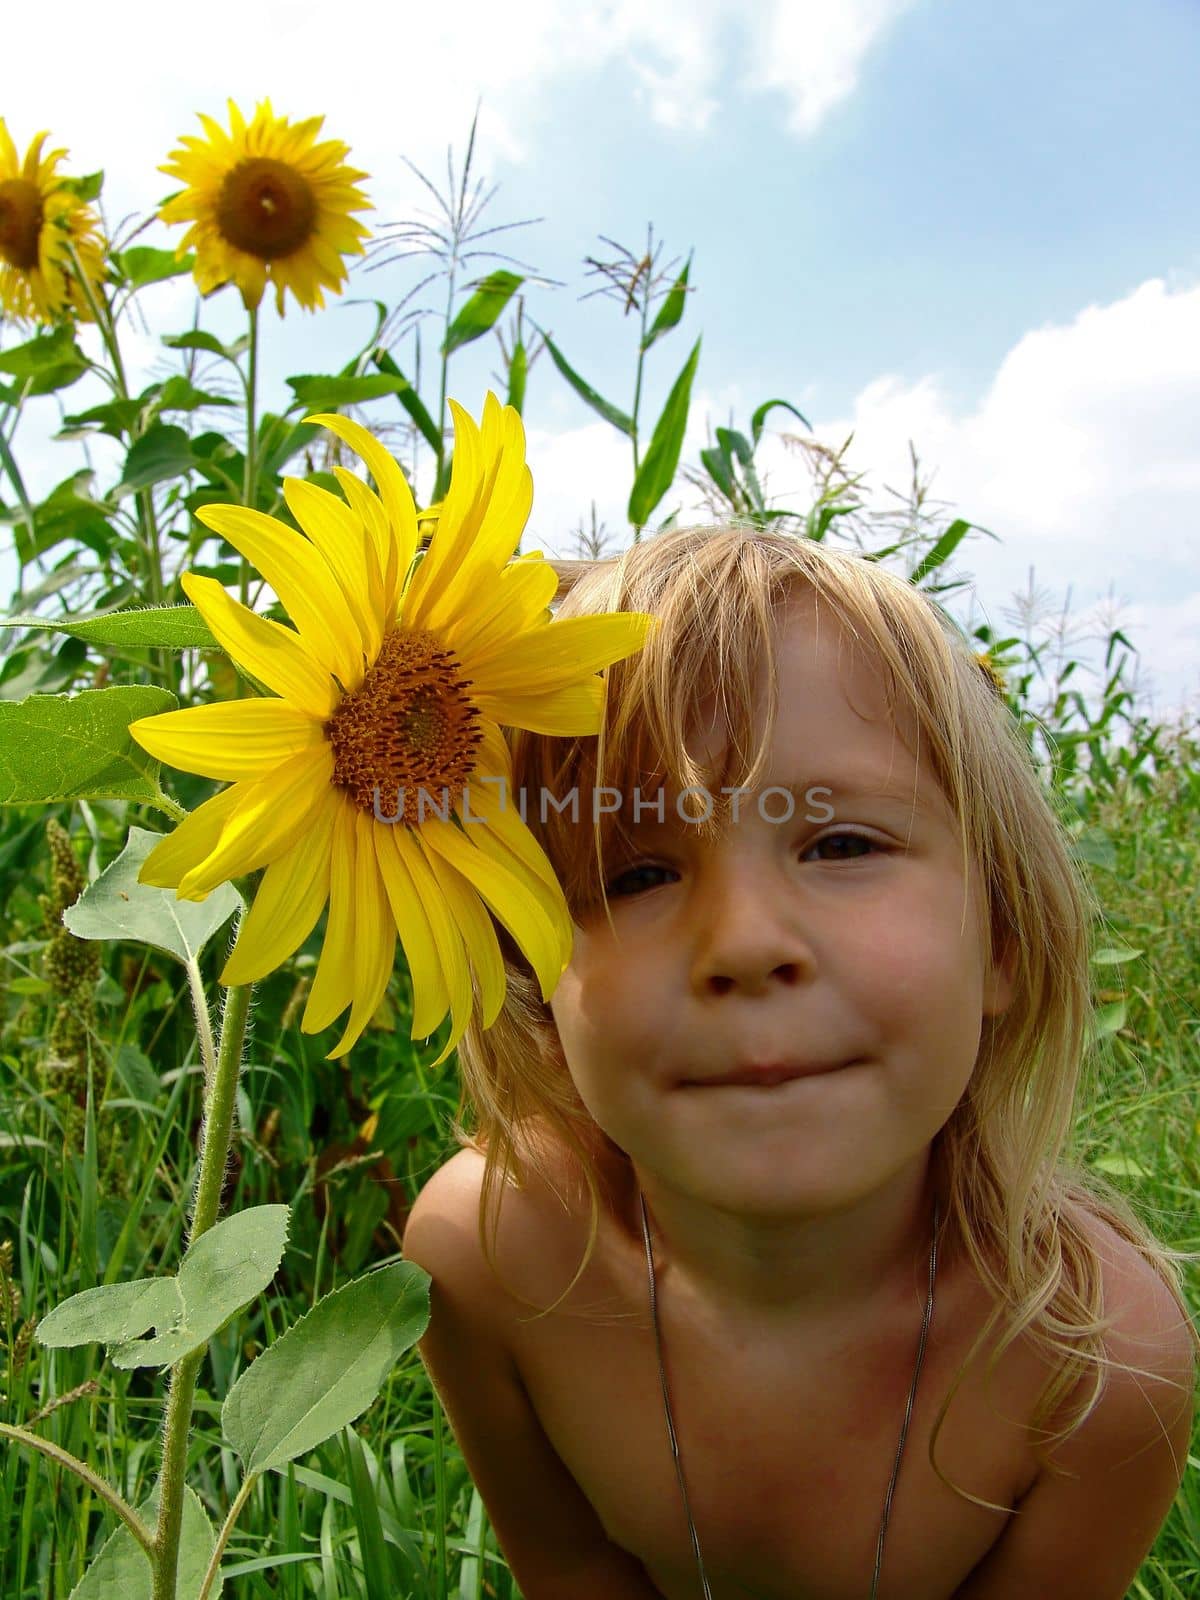 Small girl is staying on the field among the sunflowers with a cunning face by kertis